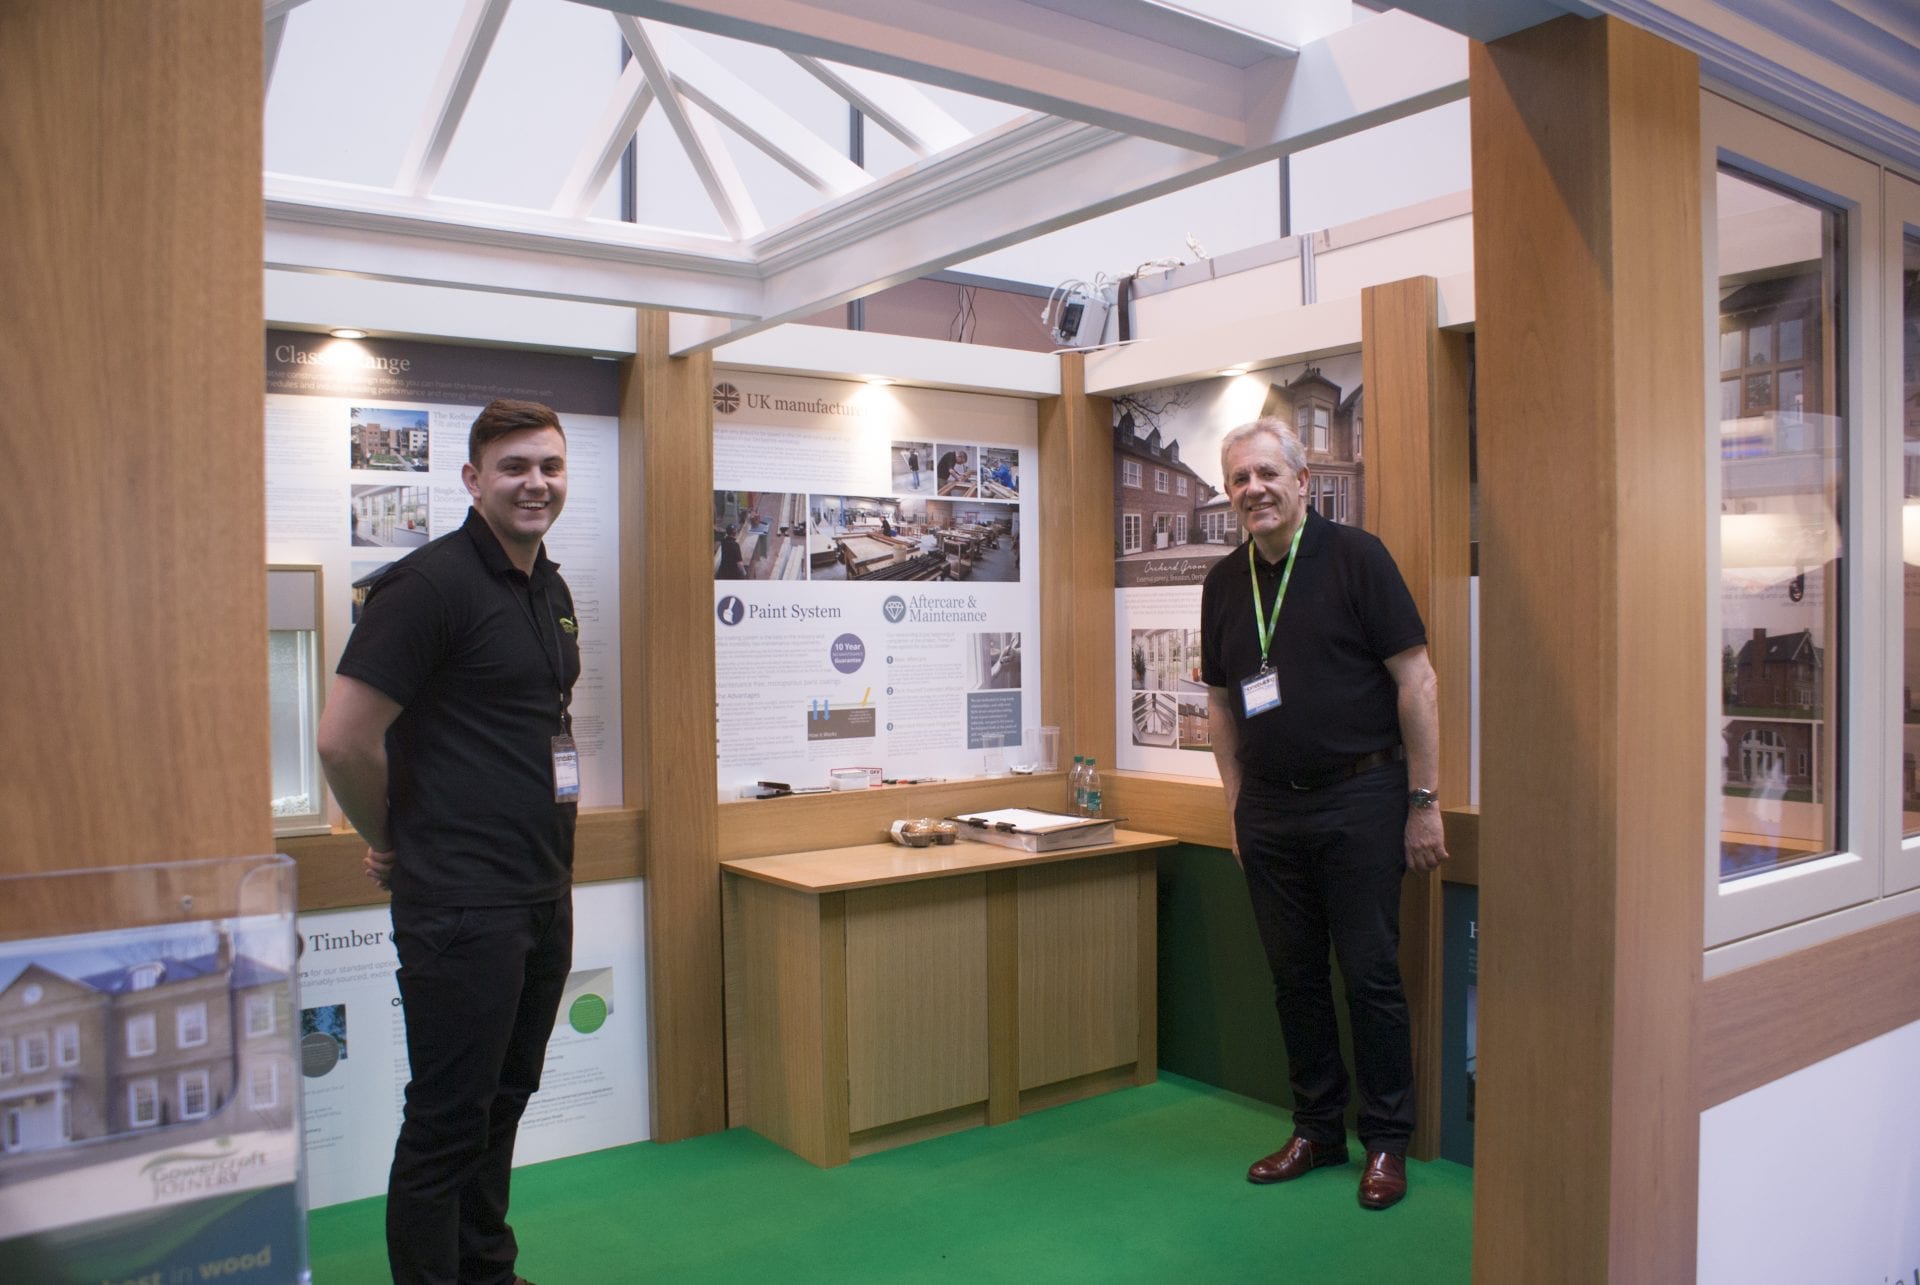 Gowercroft team at a trade stand